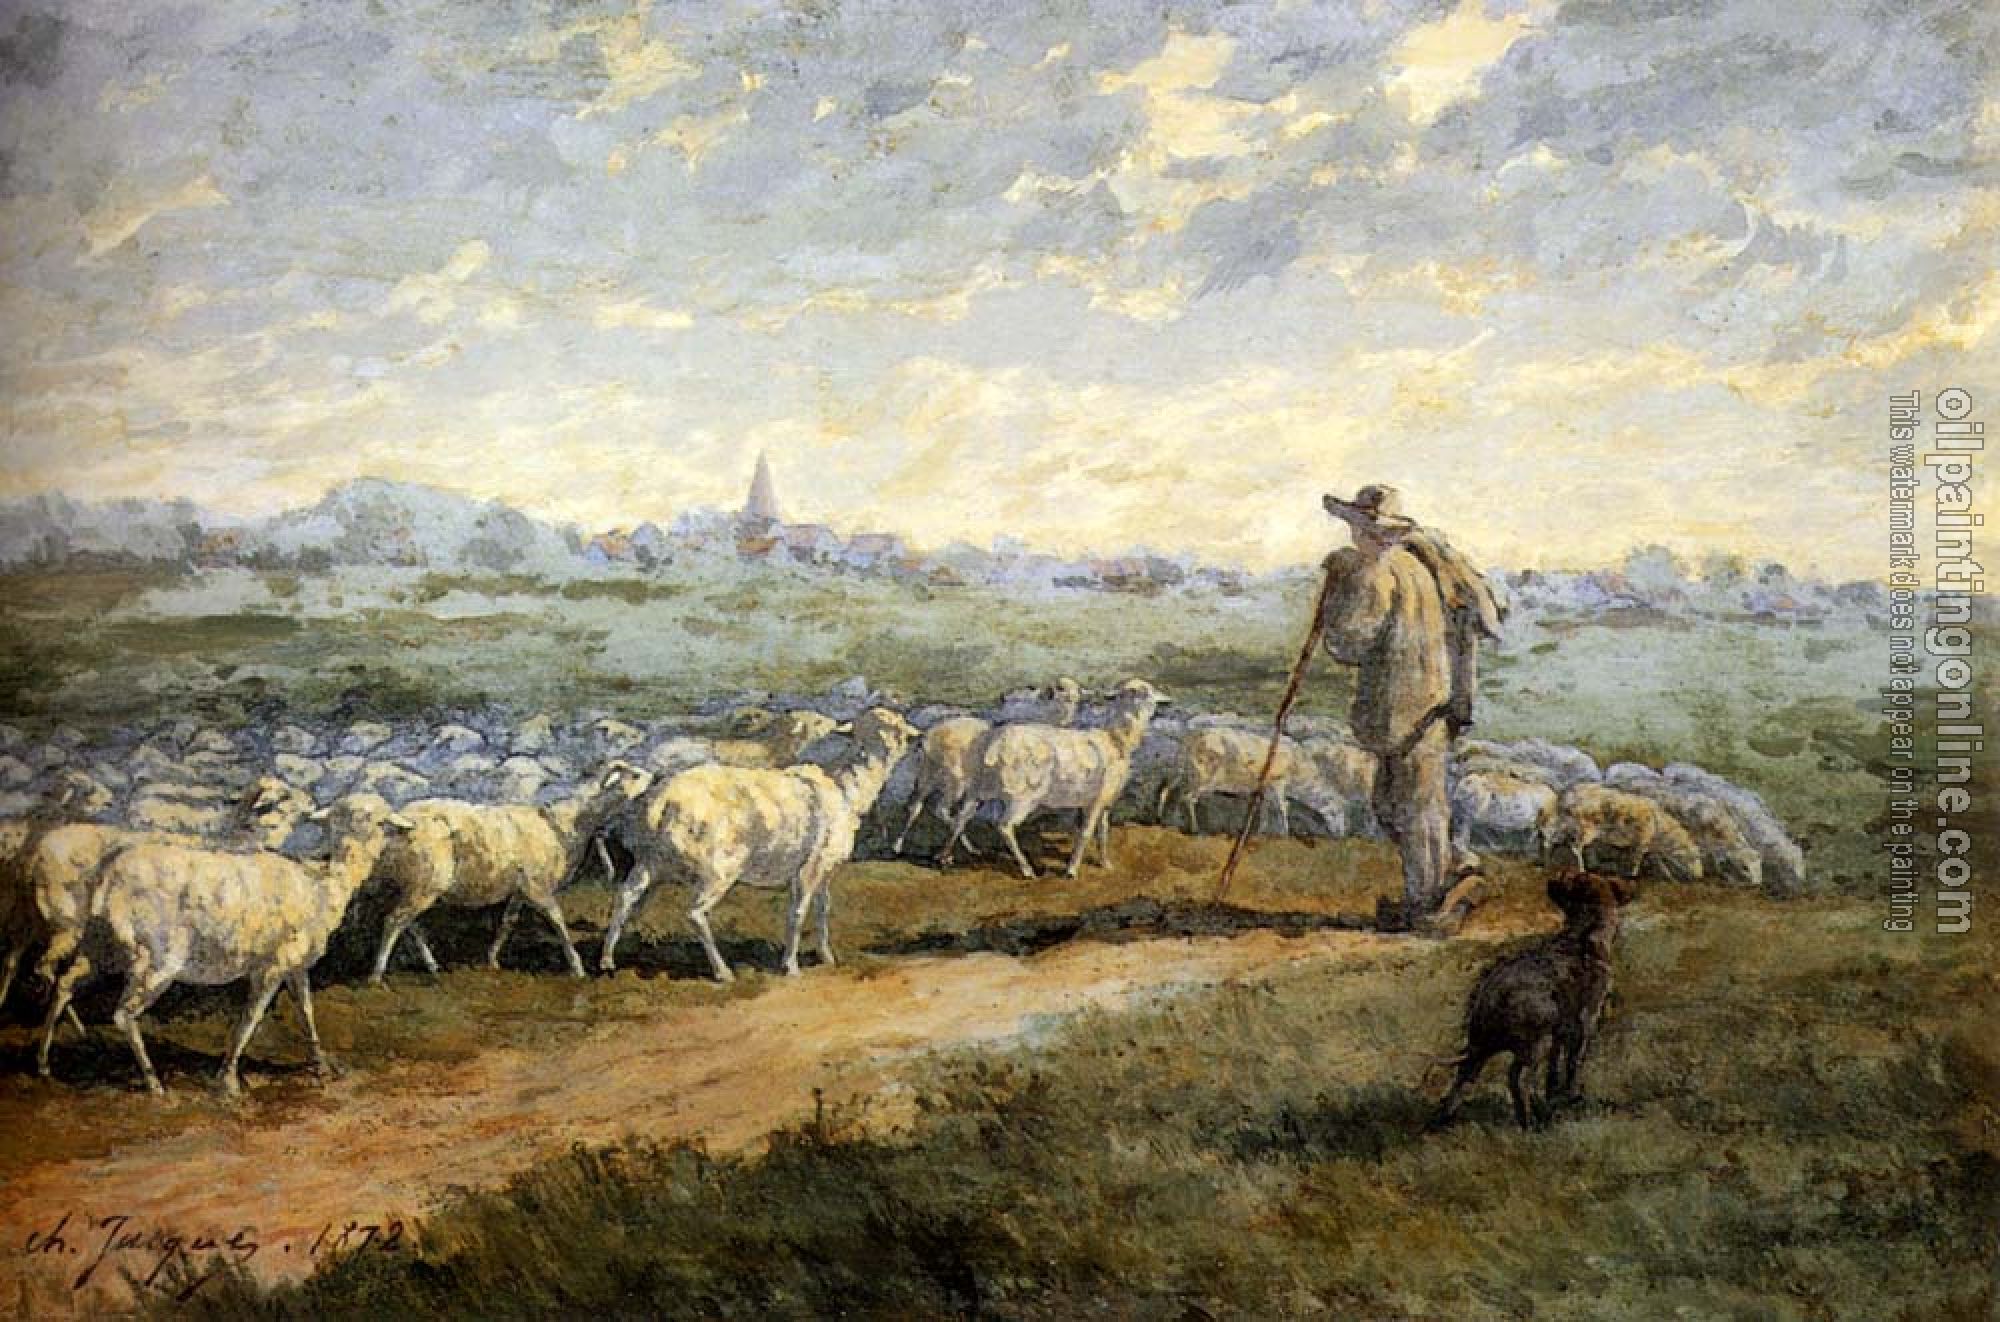 Charles Emile Jacque - Landscape With A Flock Of Sheep